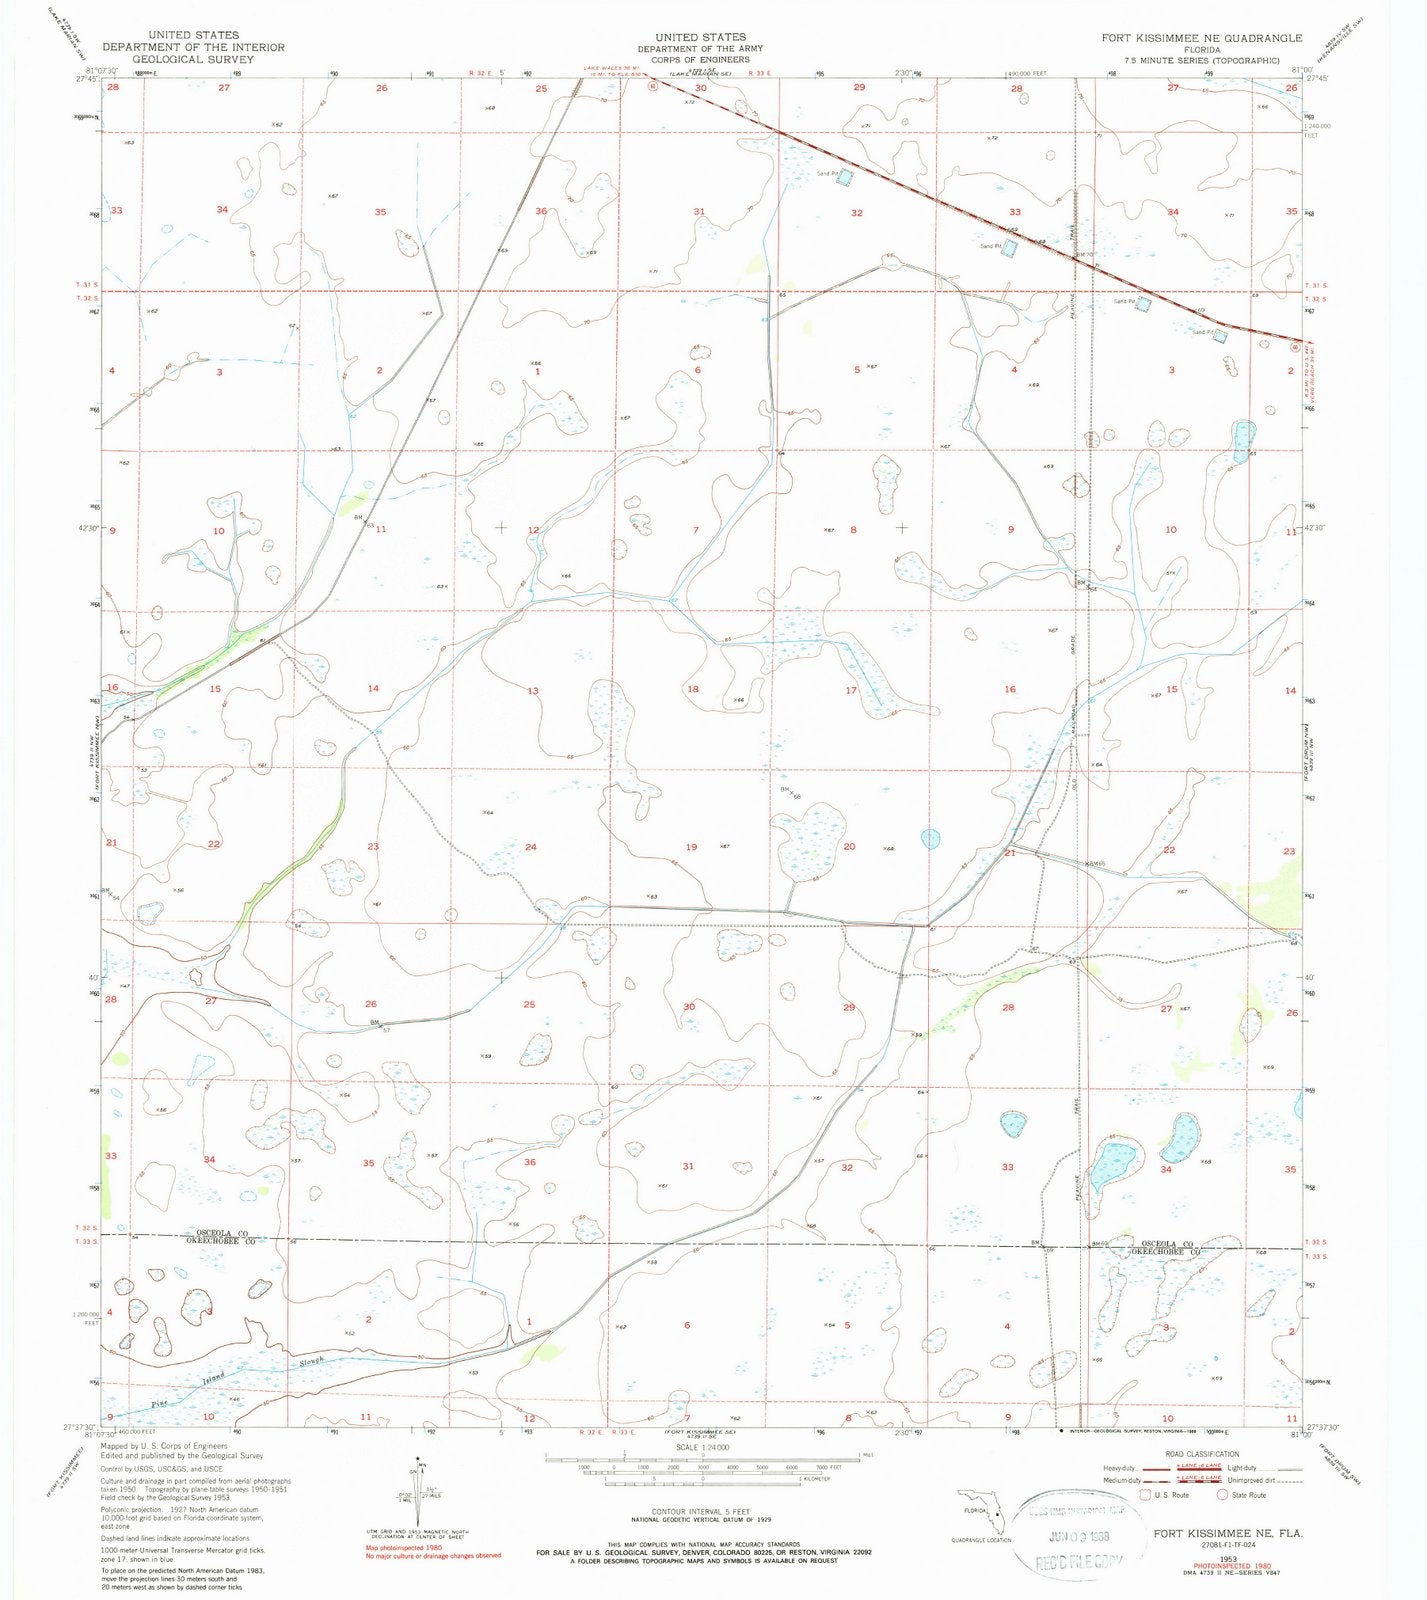 1953 Fort Kissimmee, FL - Florida - USGS Topographic Map